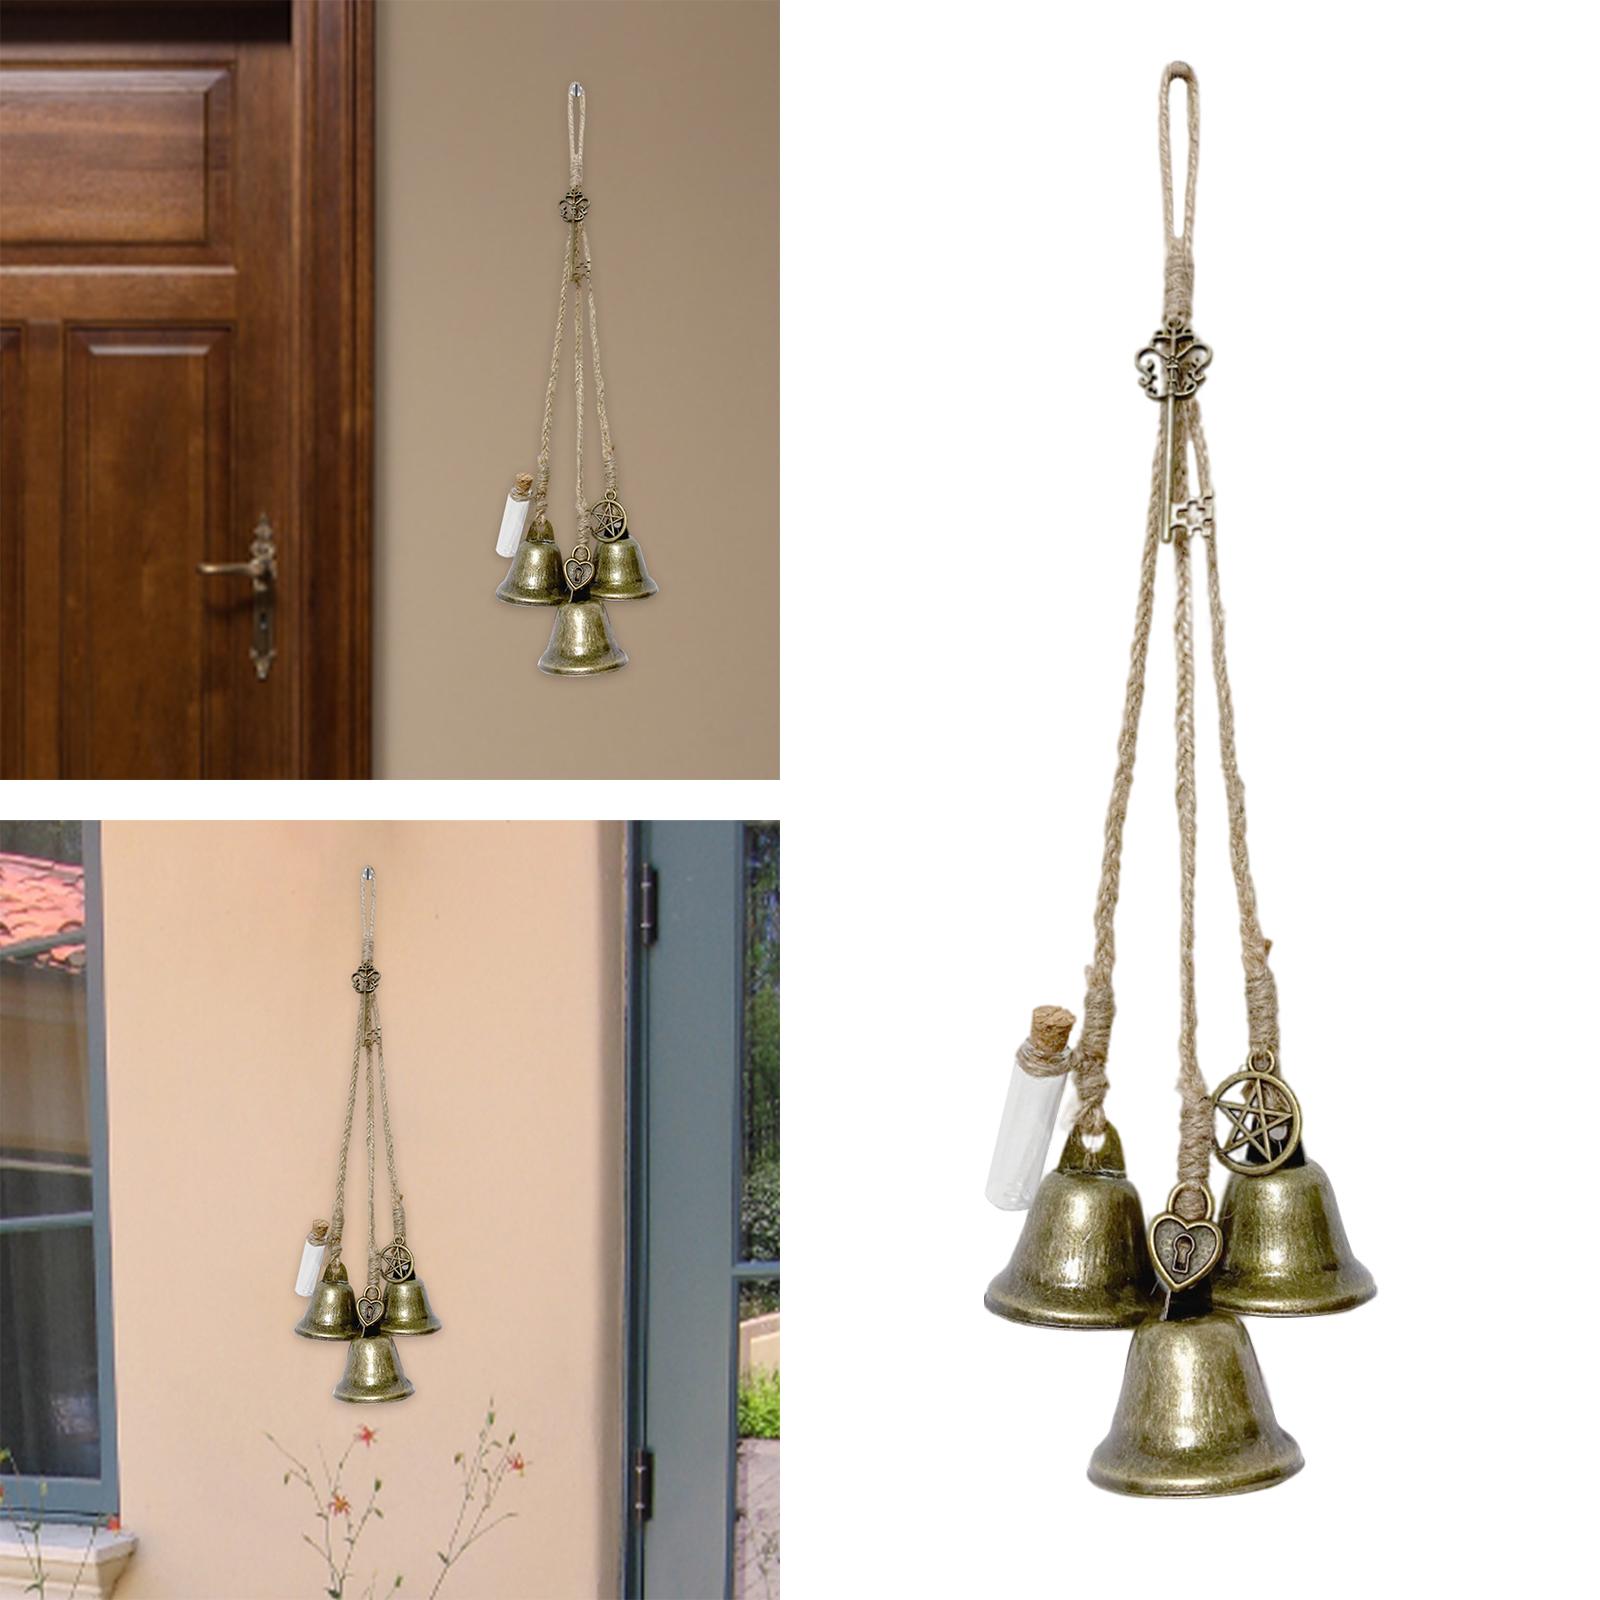 Witch Bells Windbells Wall Hanging Wind Chime for Door Patio Three bells